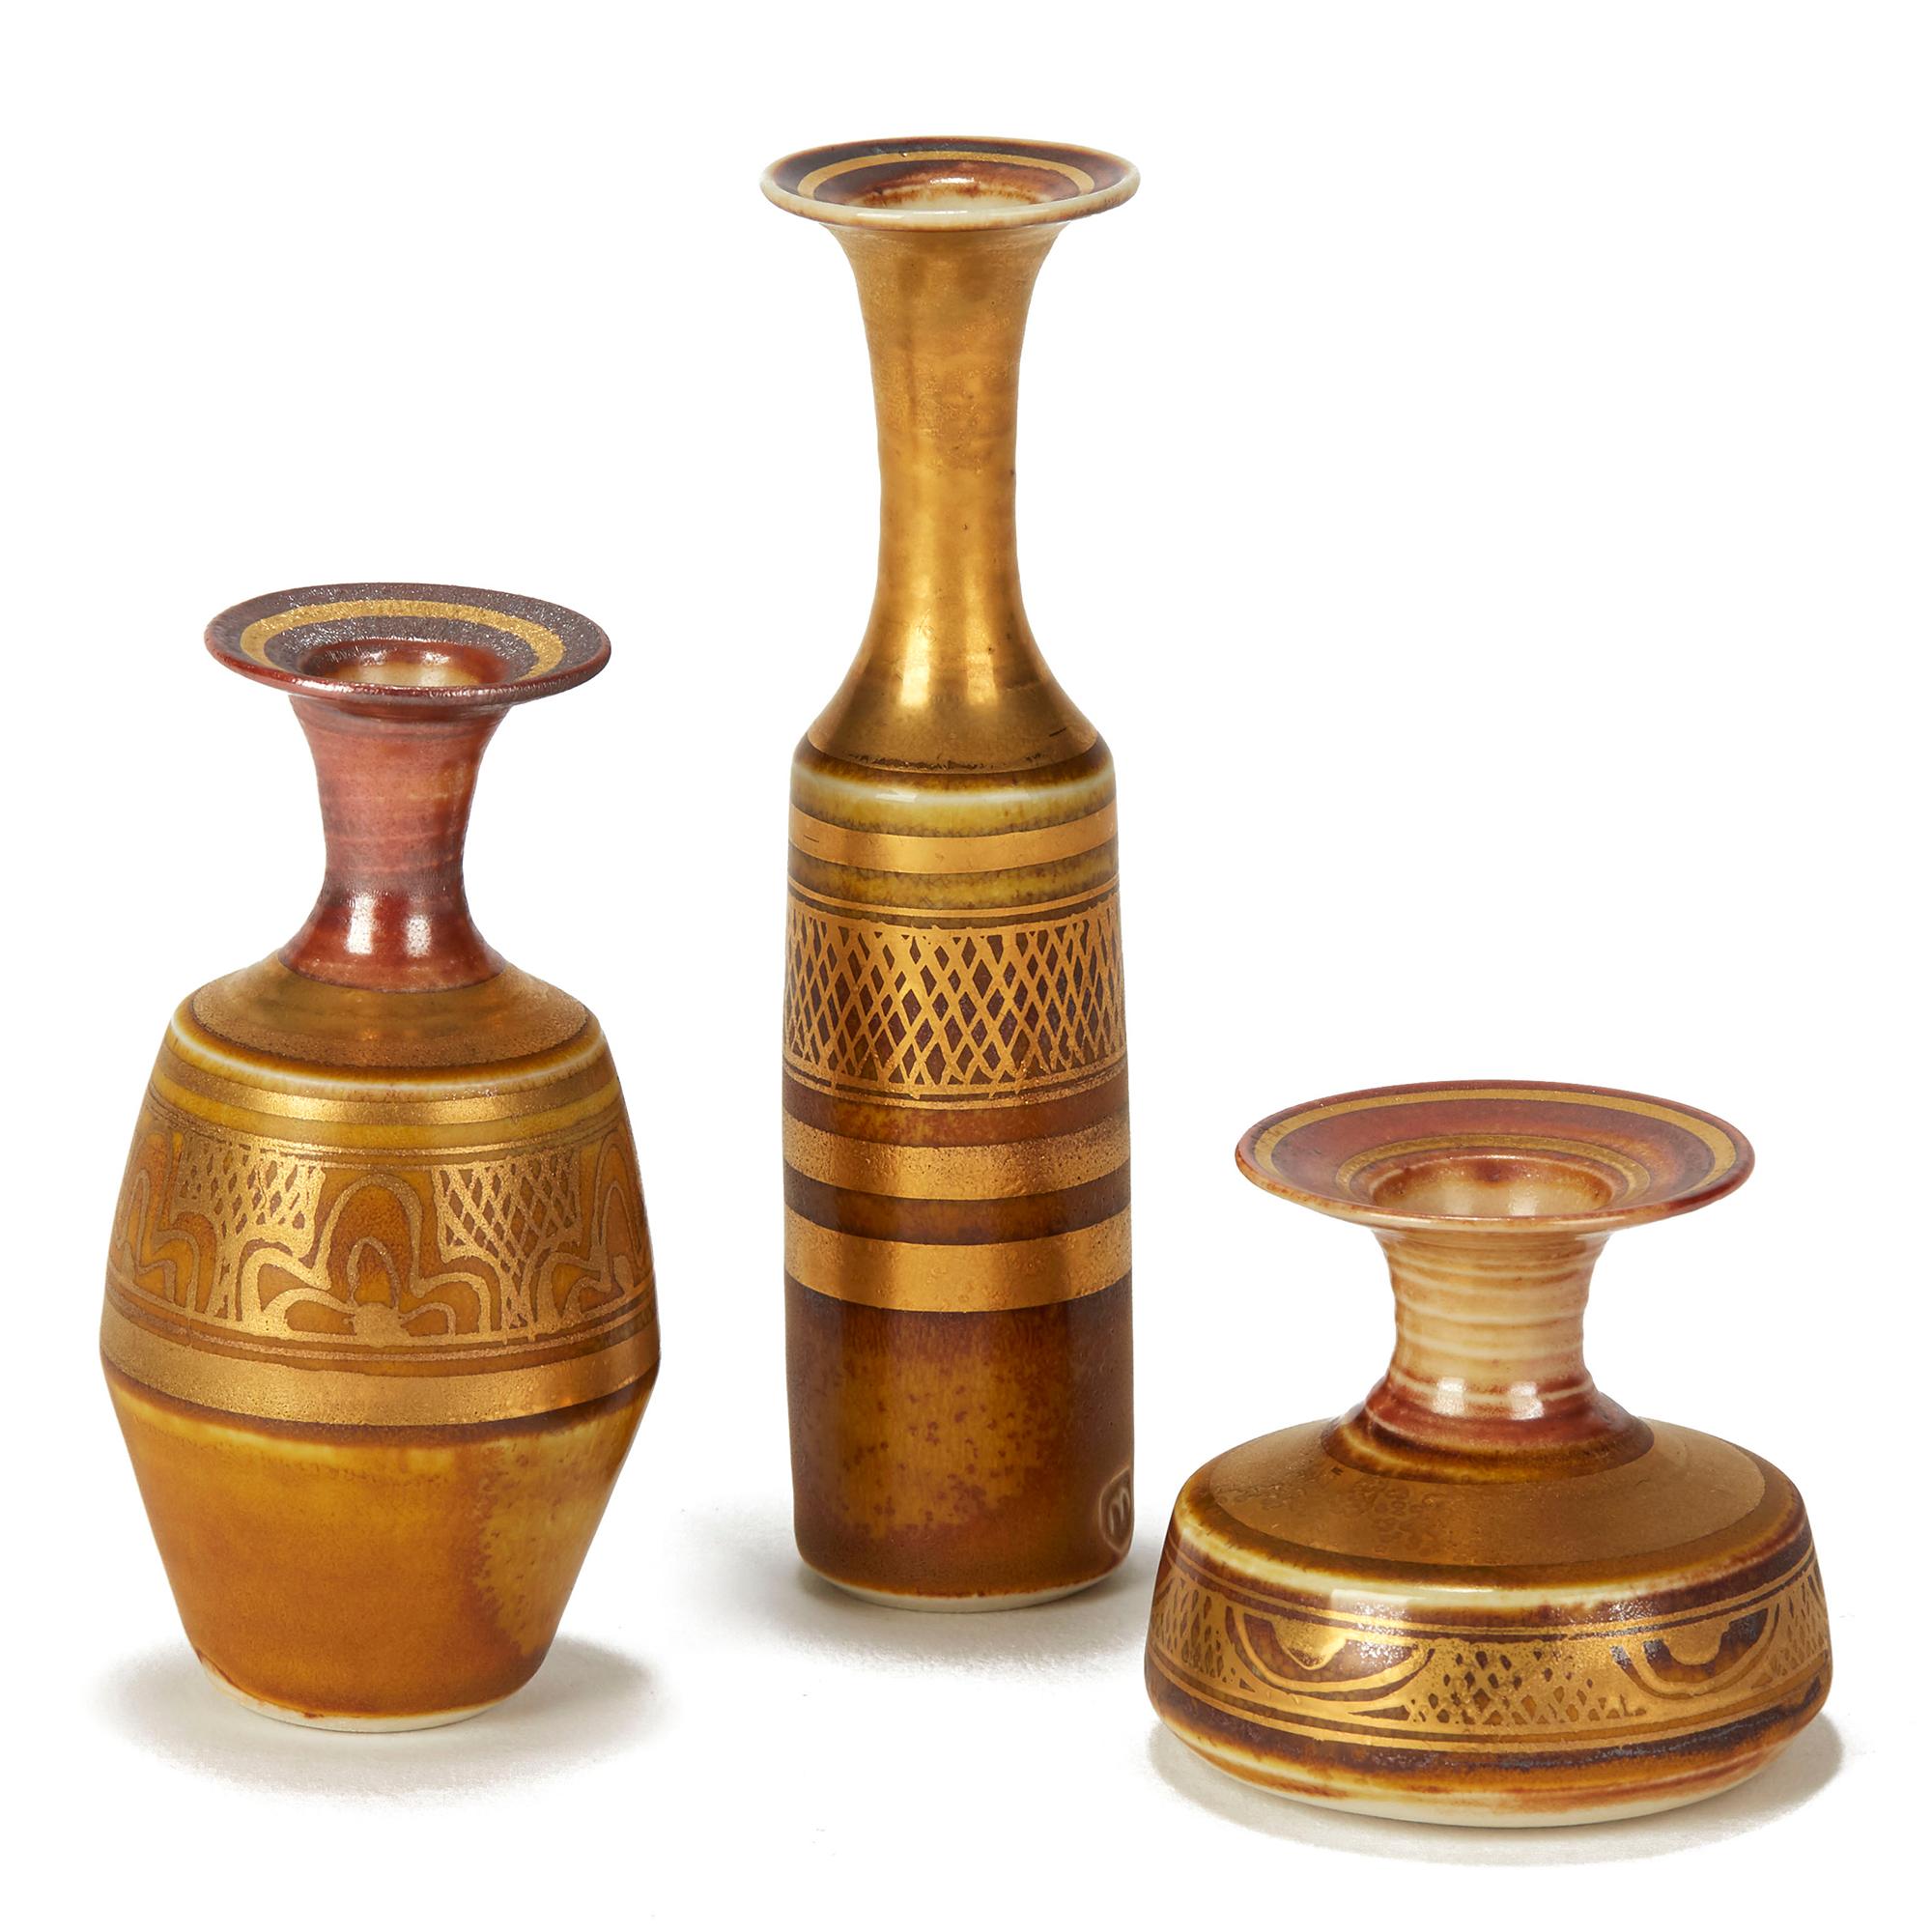 A collection of three miniature porcelain vases by Mary Rich (b.1940) of varying shape from tall slender form to squat rounded form each decorated with geometric and Islamic styled designs in red brown colours overlaid with rich gold lustre designs.